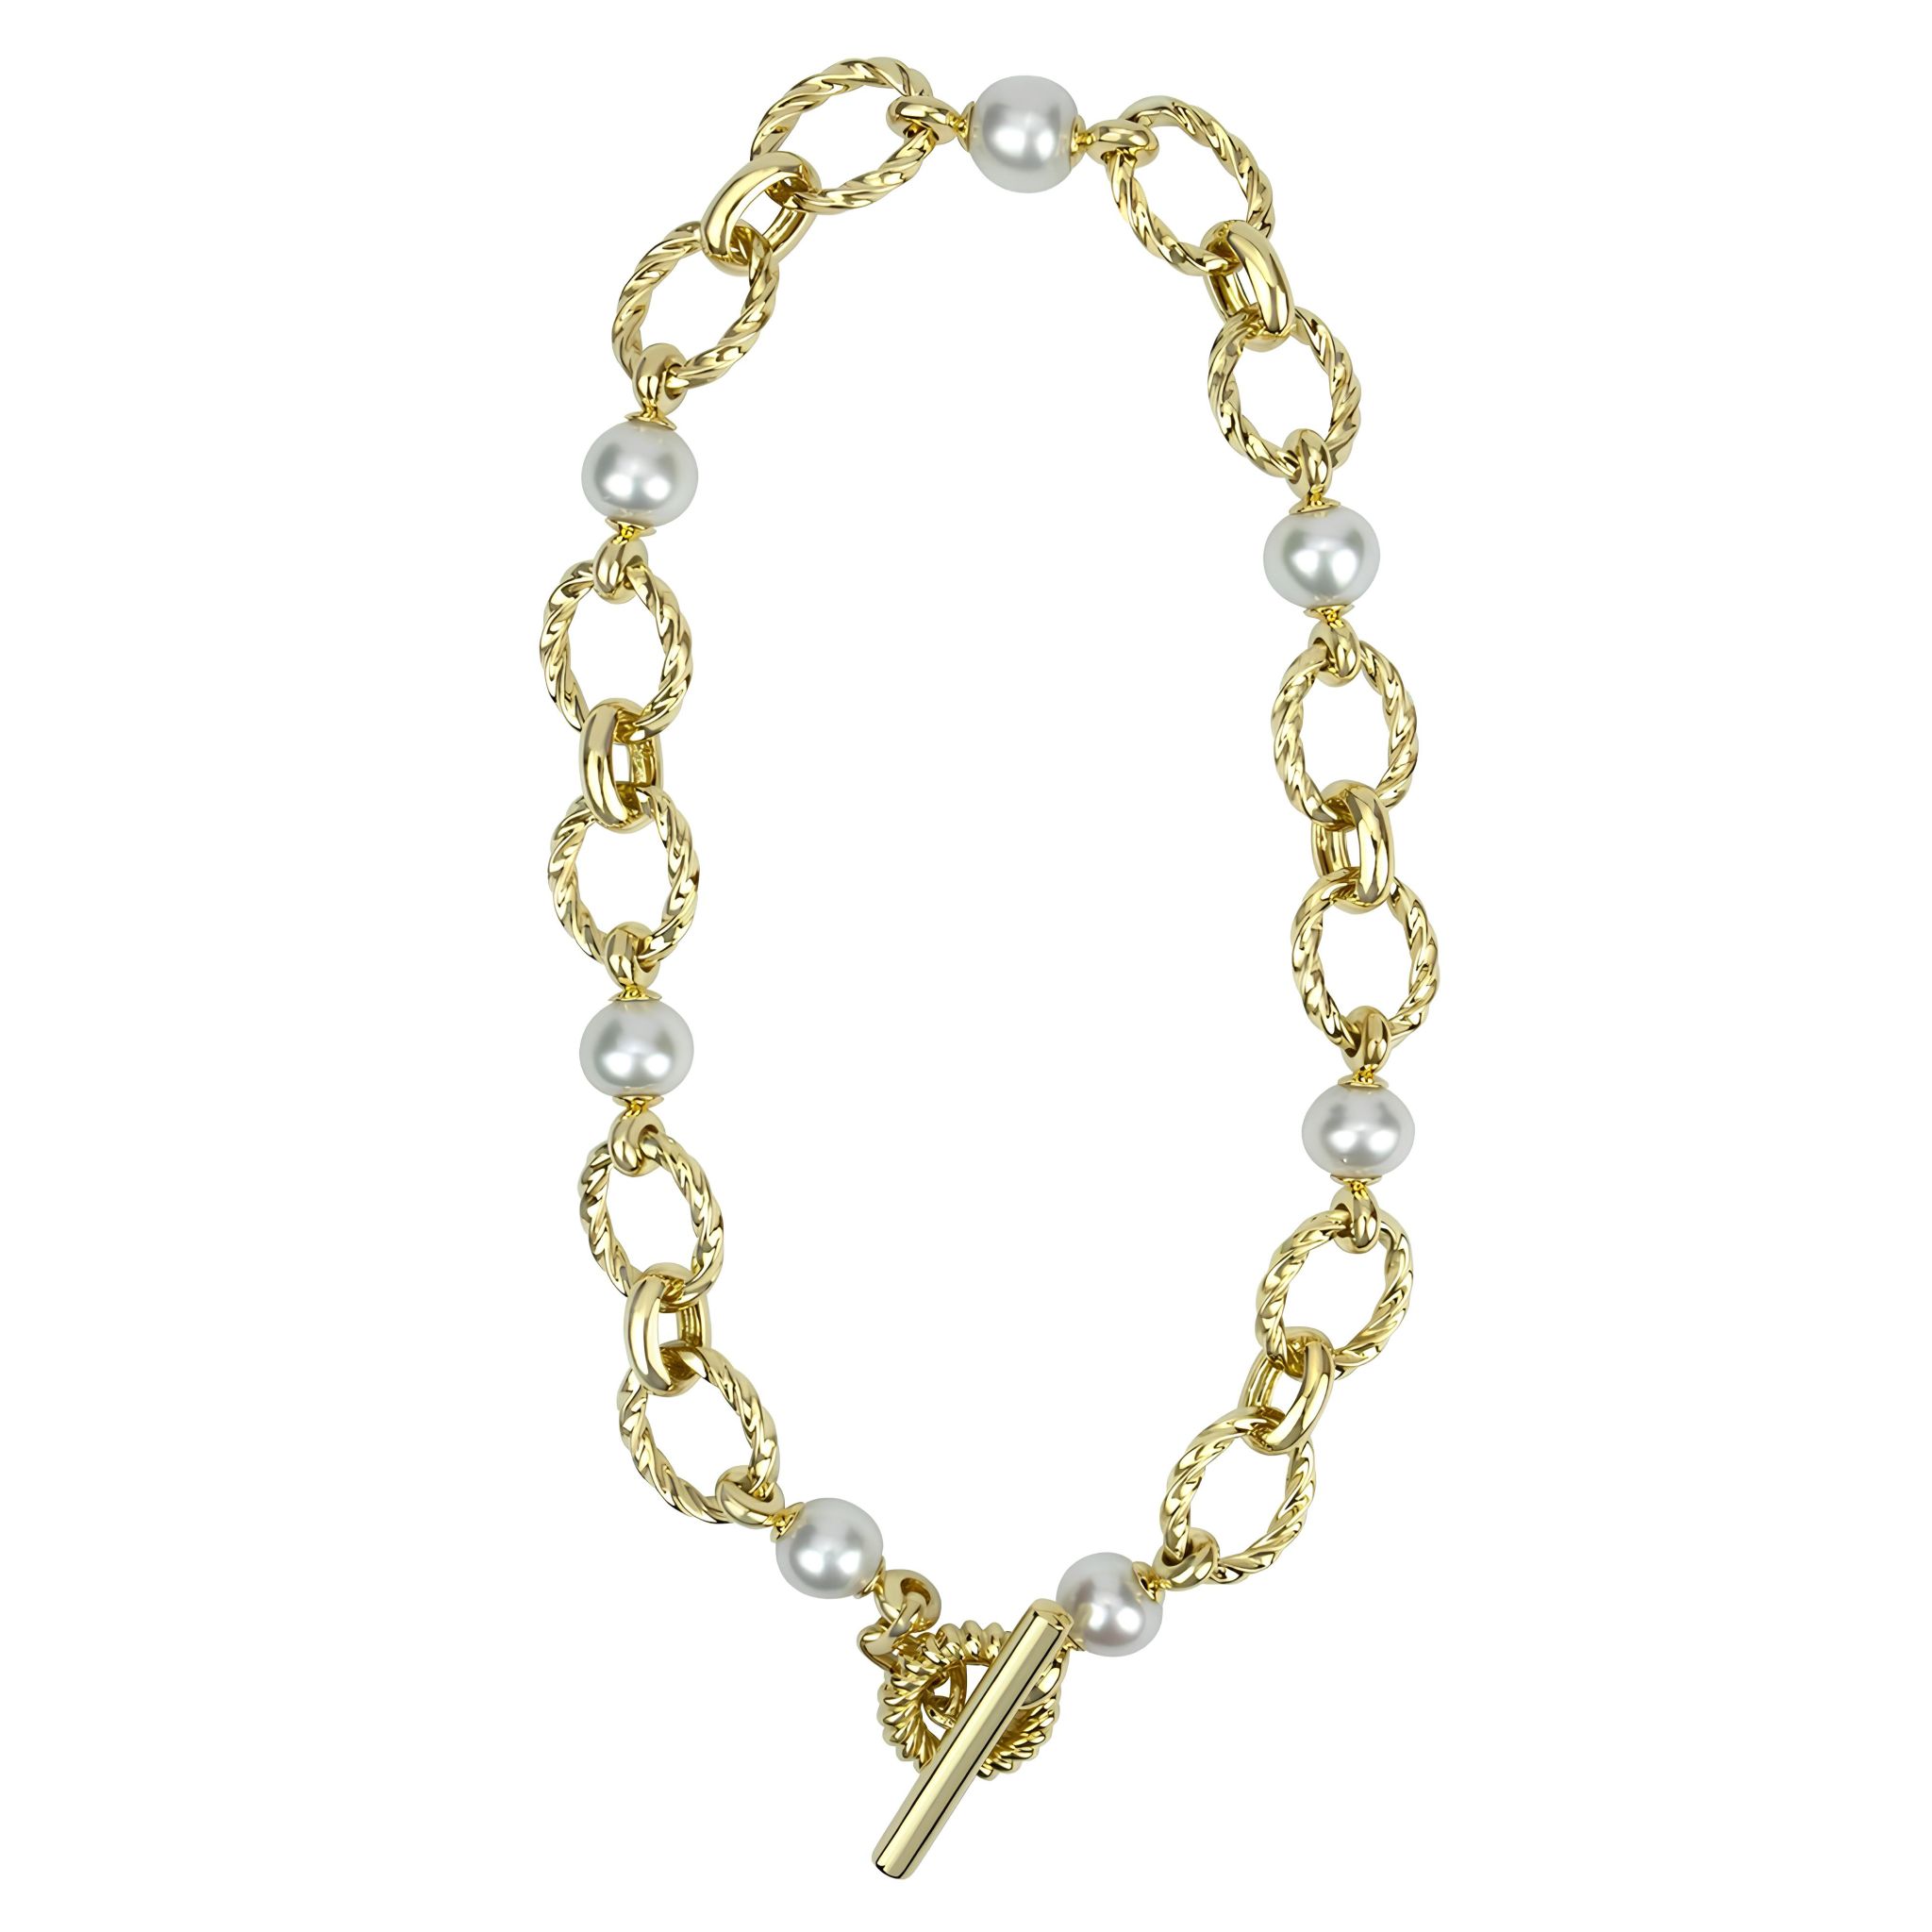 A gold necklace with pearls.